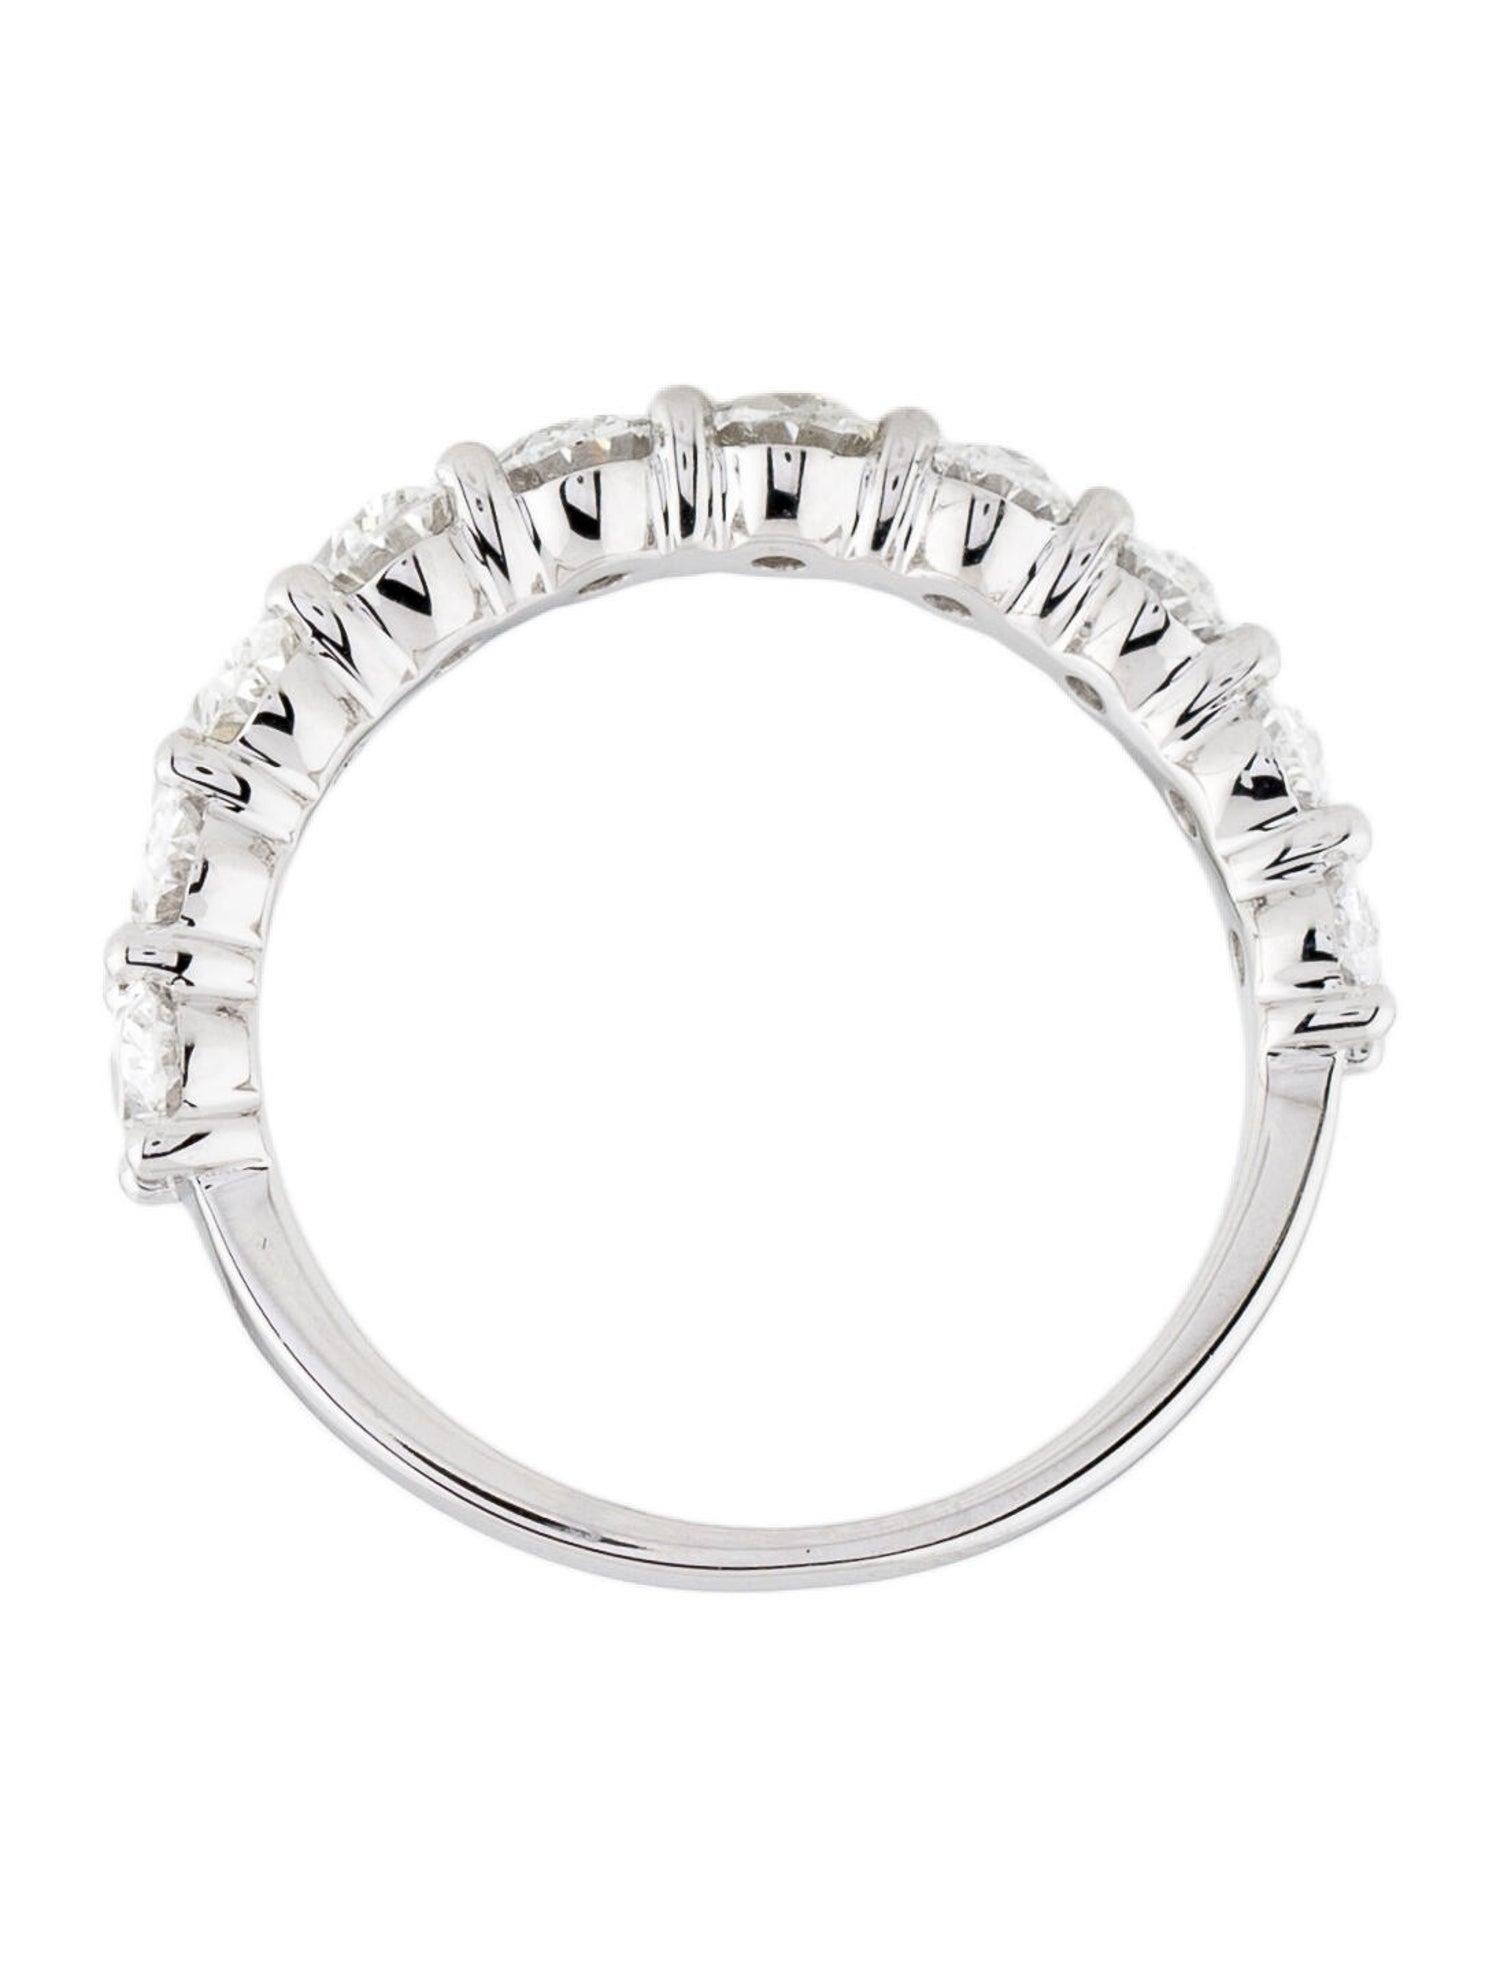 Contemporary 14K White Gold 2.00ct Diamond Oval Band for Her For Sale